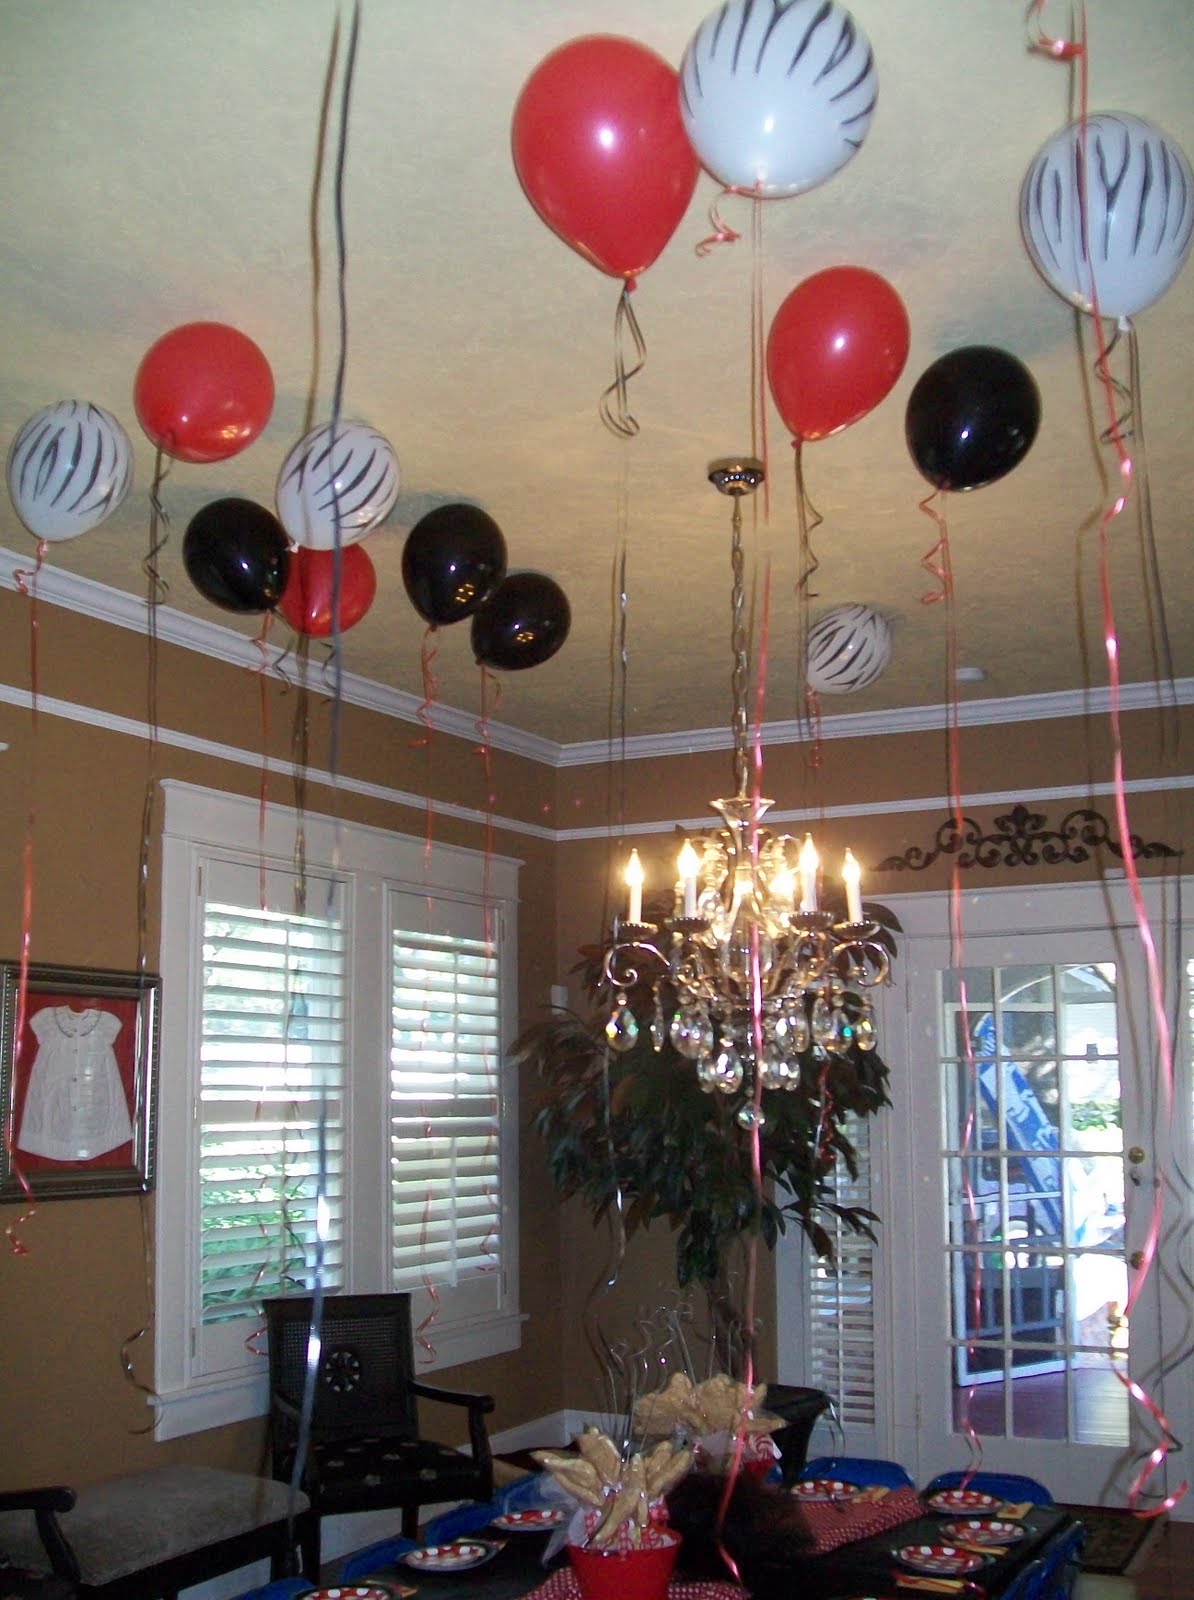 Decorating With Balloons For A Wedding